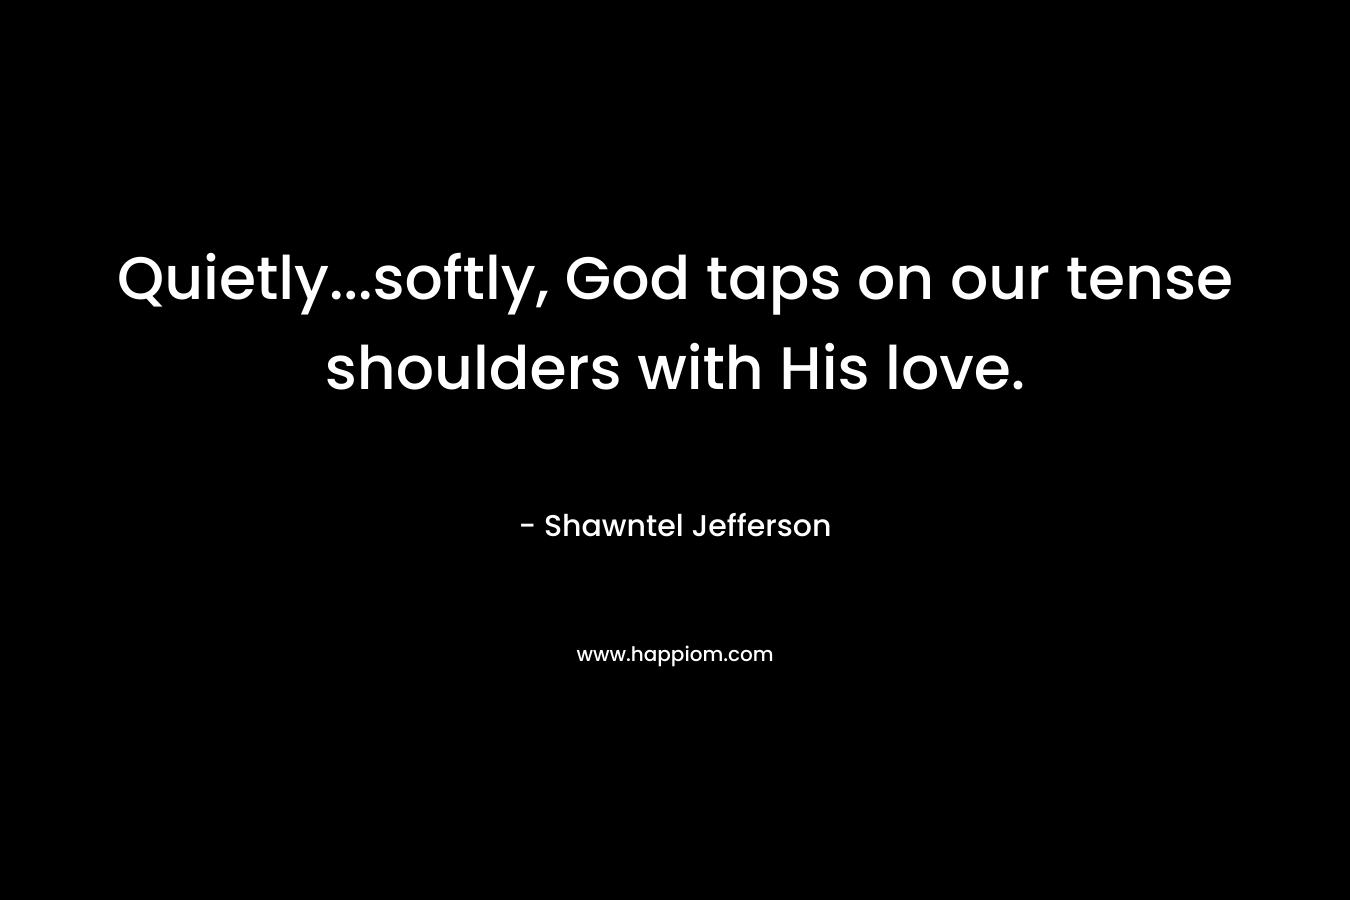 Quietly…softly, God taps on our tense shoulders with His love. – Shawntel Jefferson